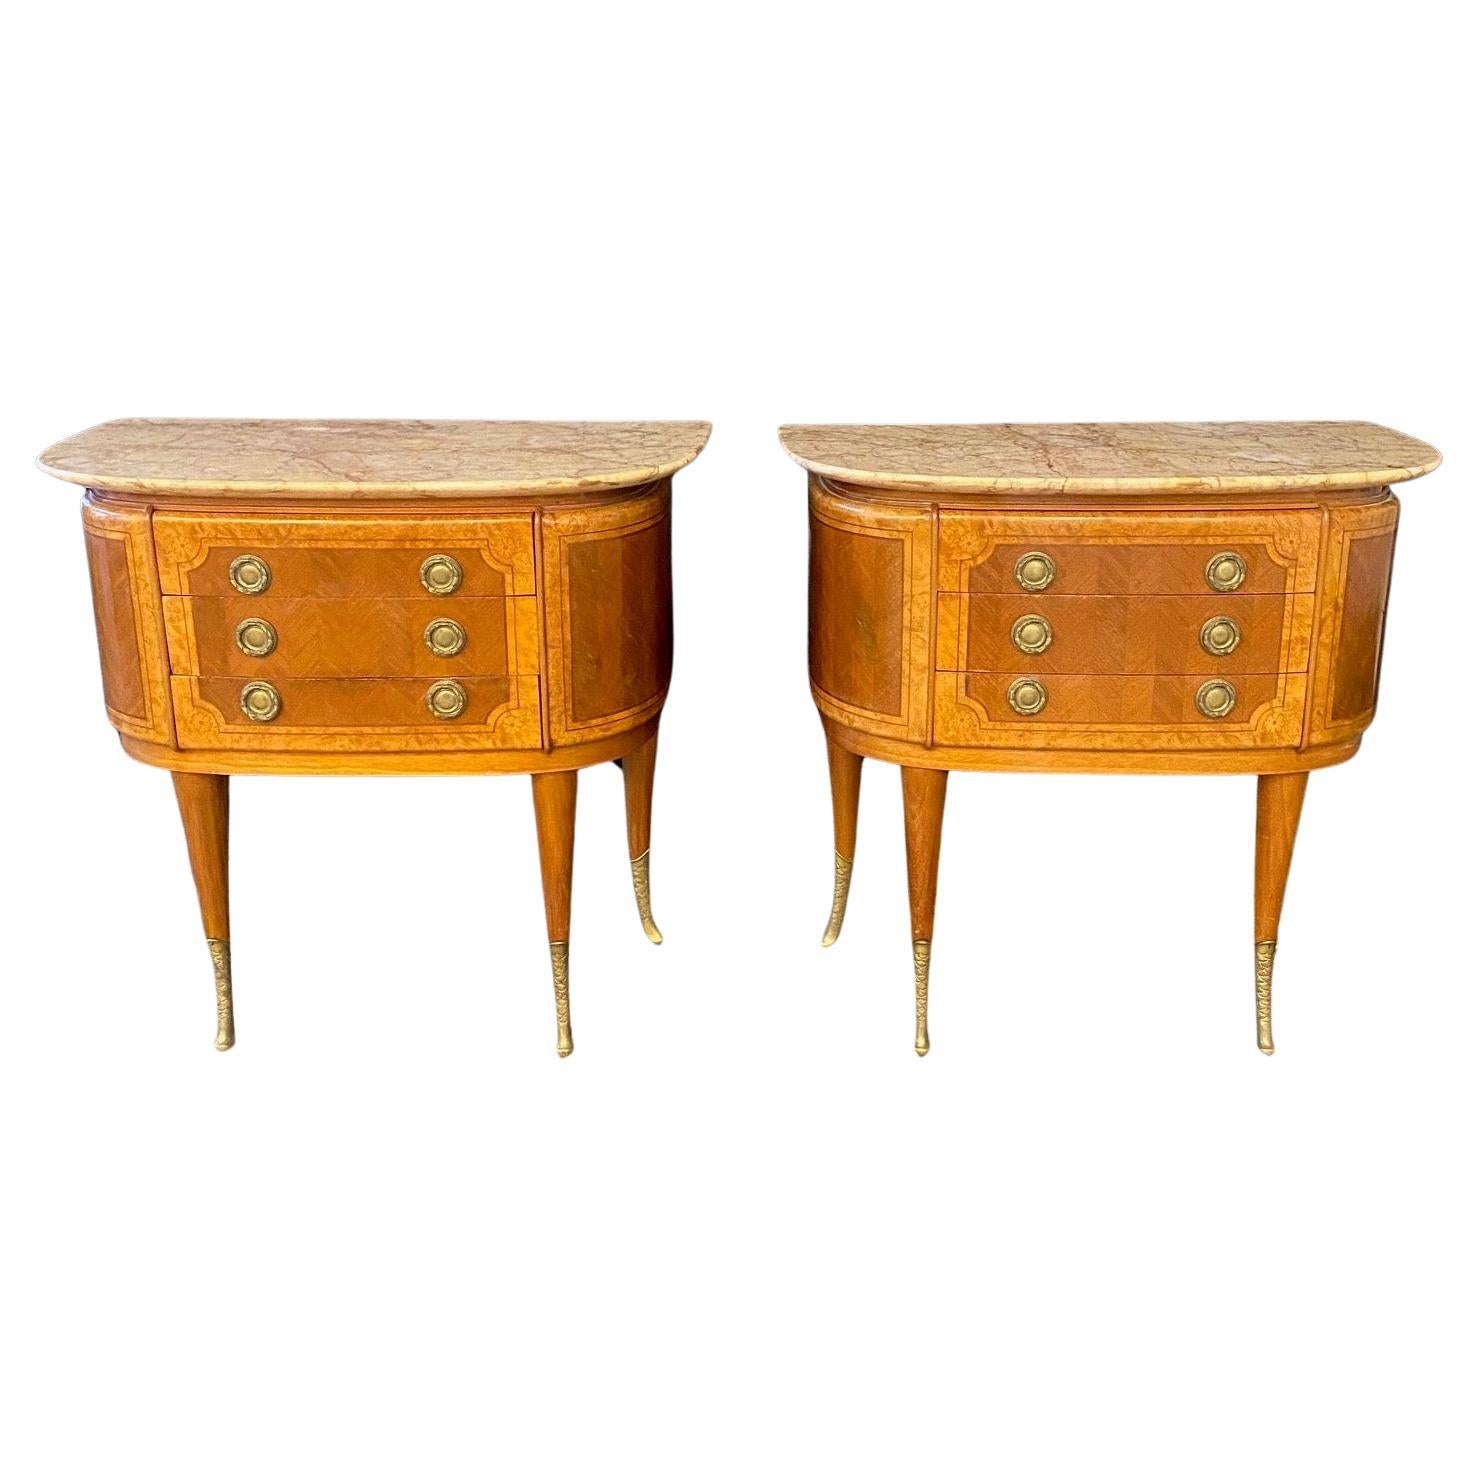 Pair of French Petite Inlaid Neoclassical Walnut Demilune Commodes Night Stands